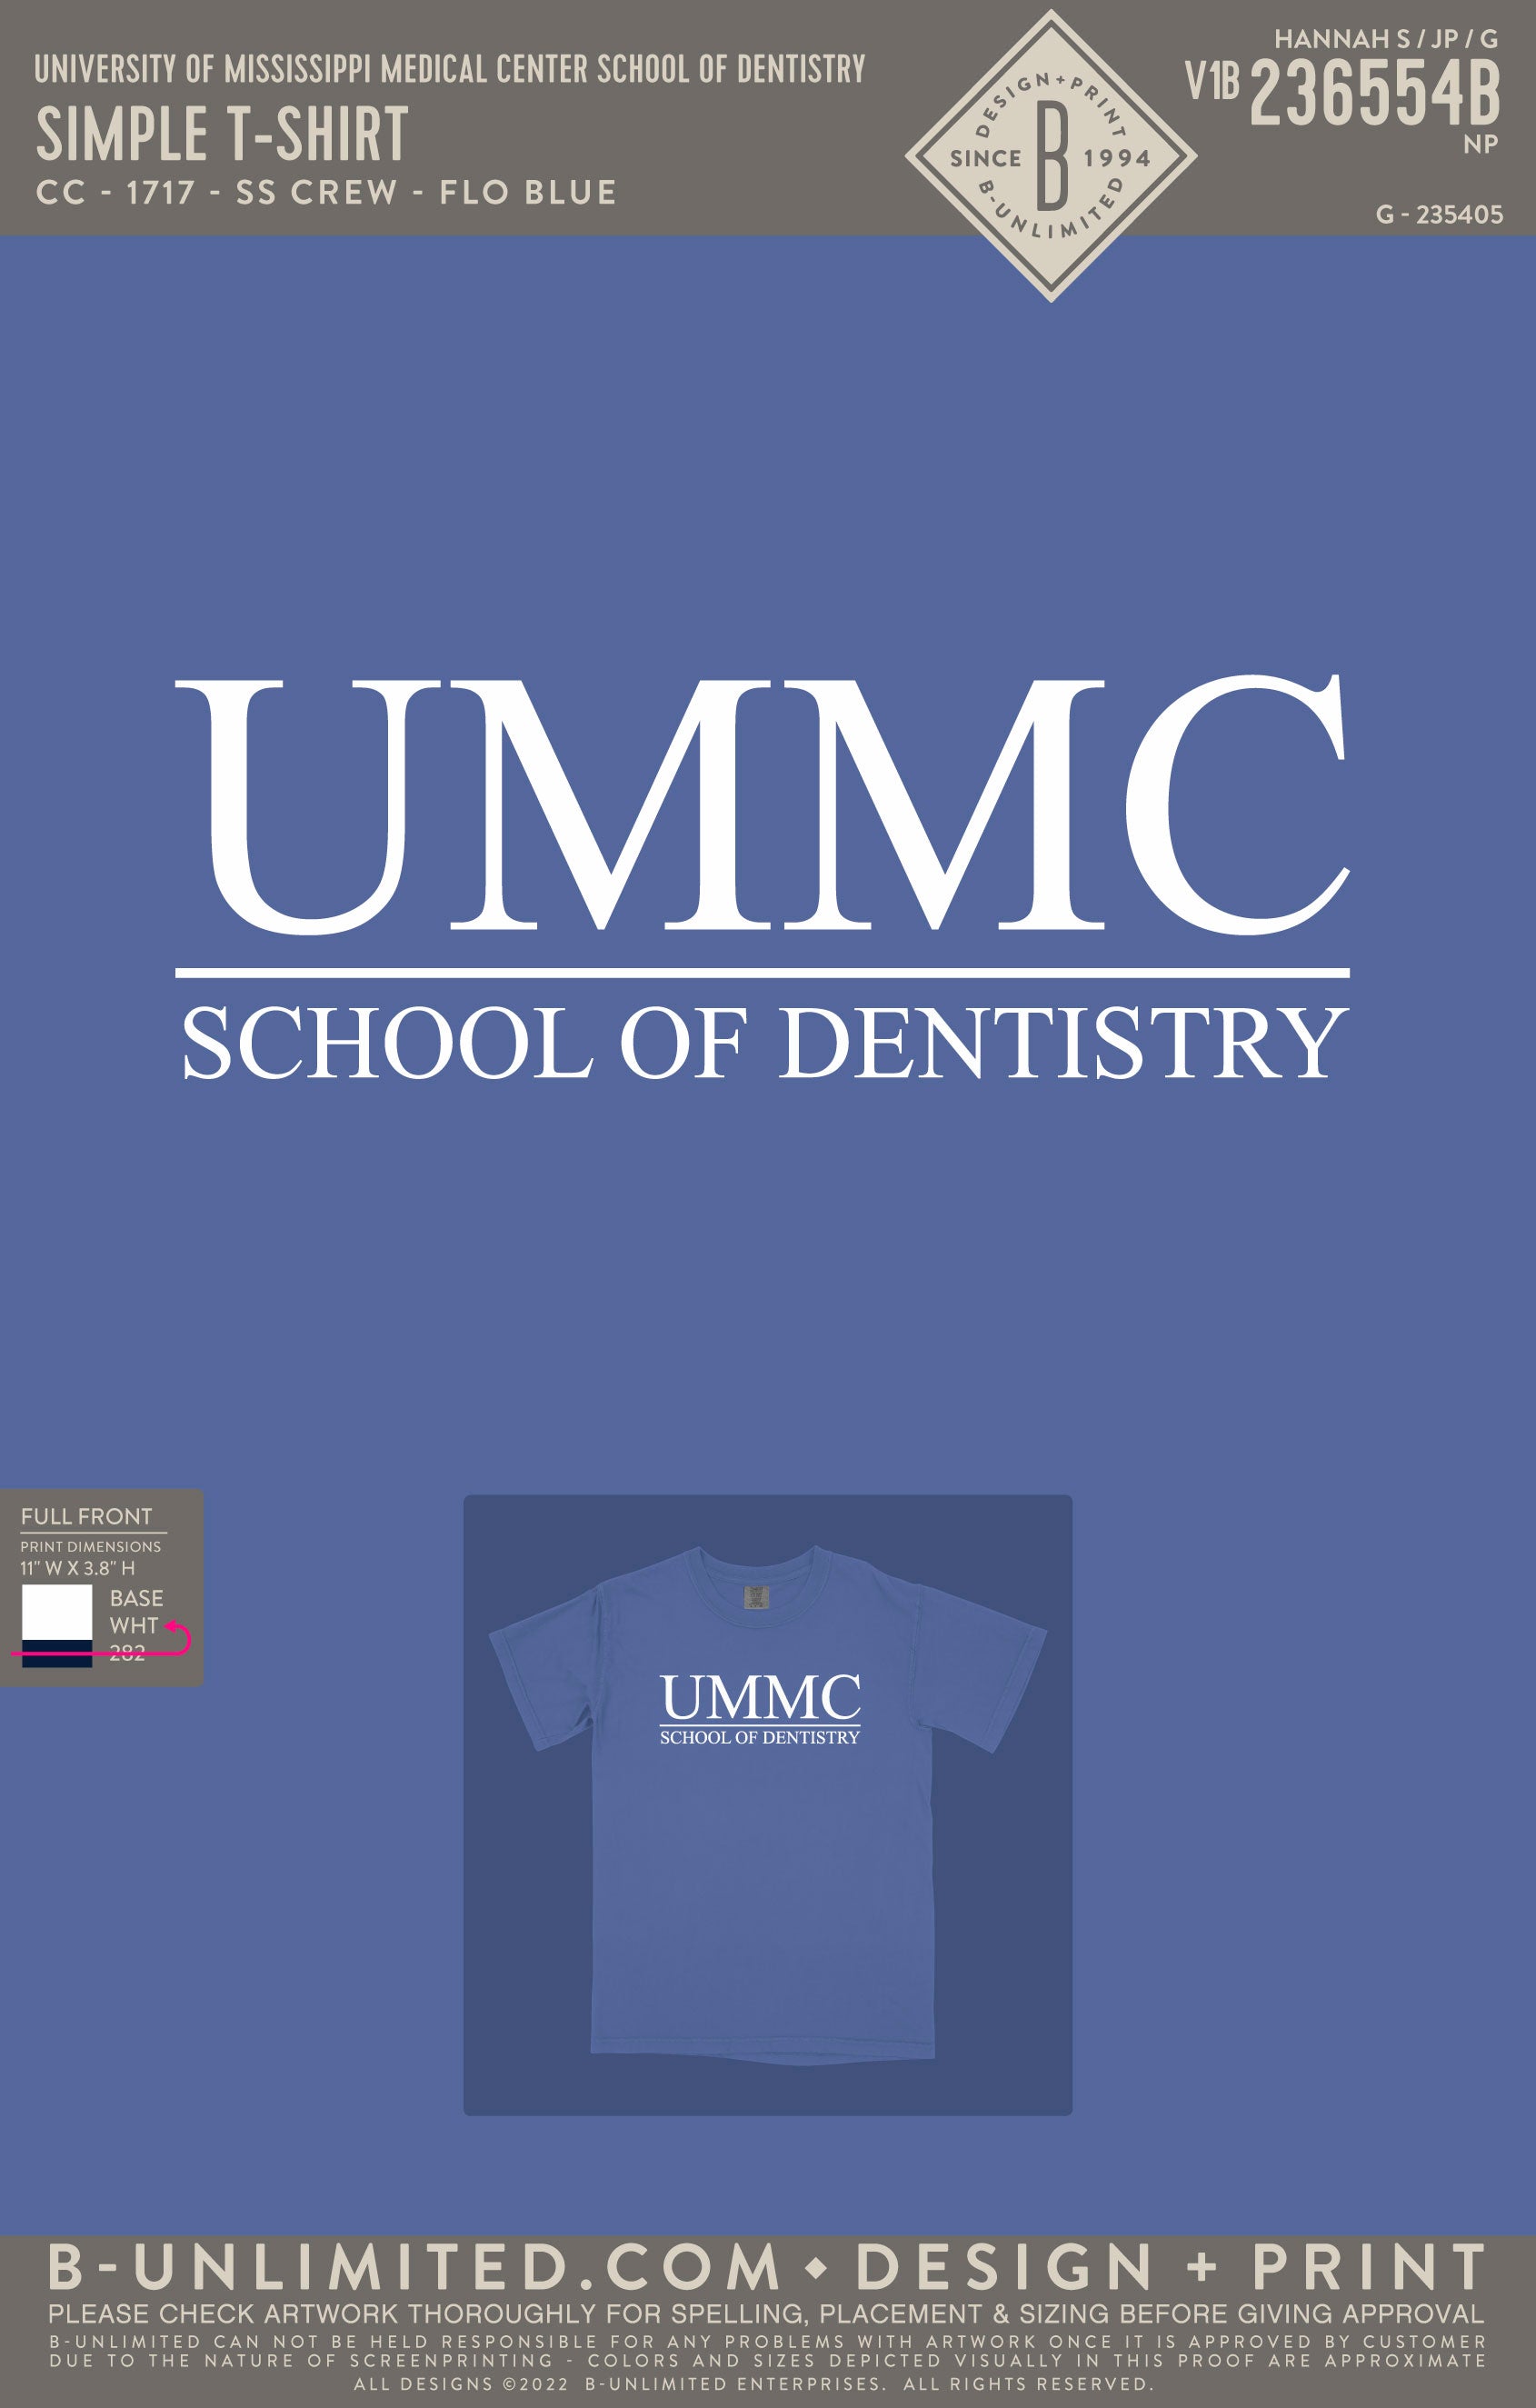 University of Mississippi Medical Center School of Dentistry - Simple T-Shirt - CC - 1717 - SS Crew - Flo Blue